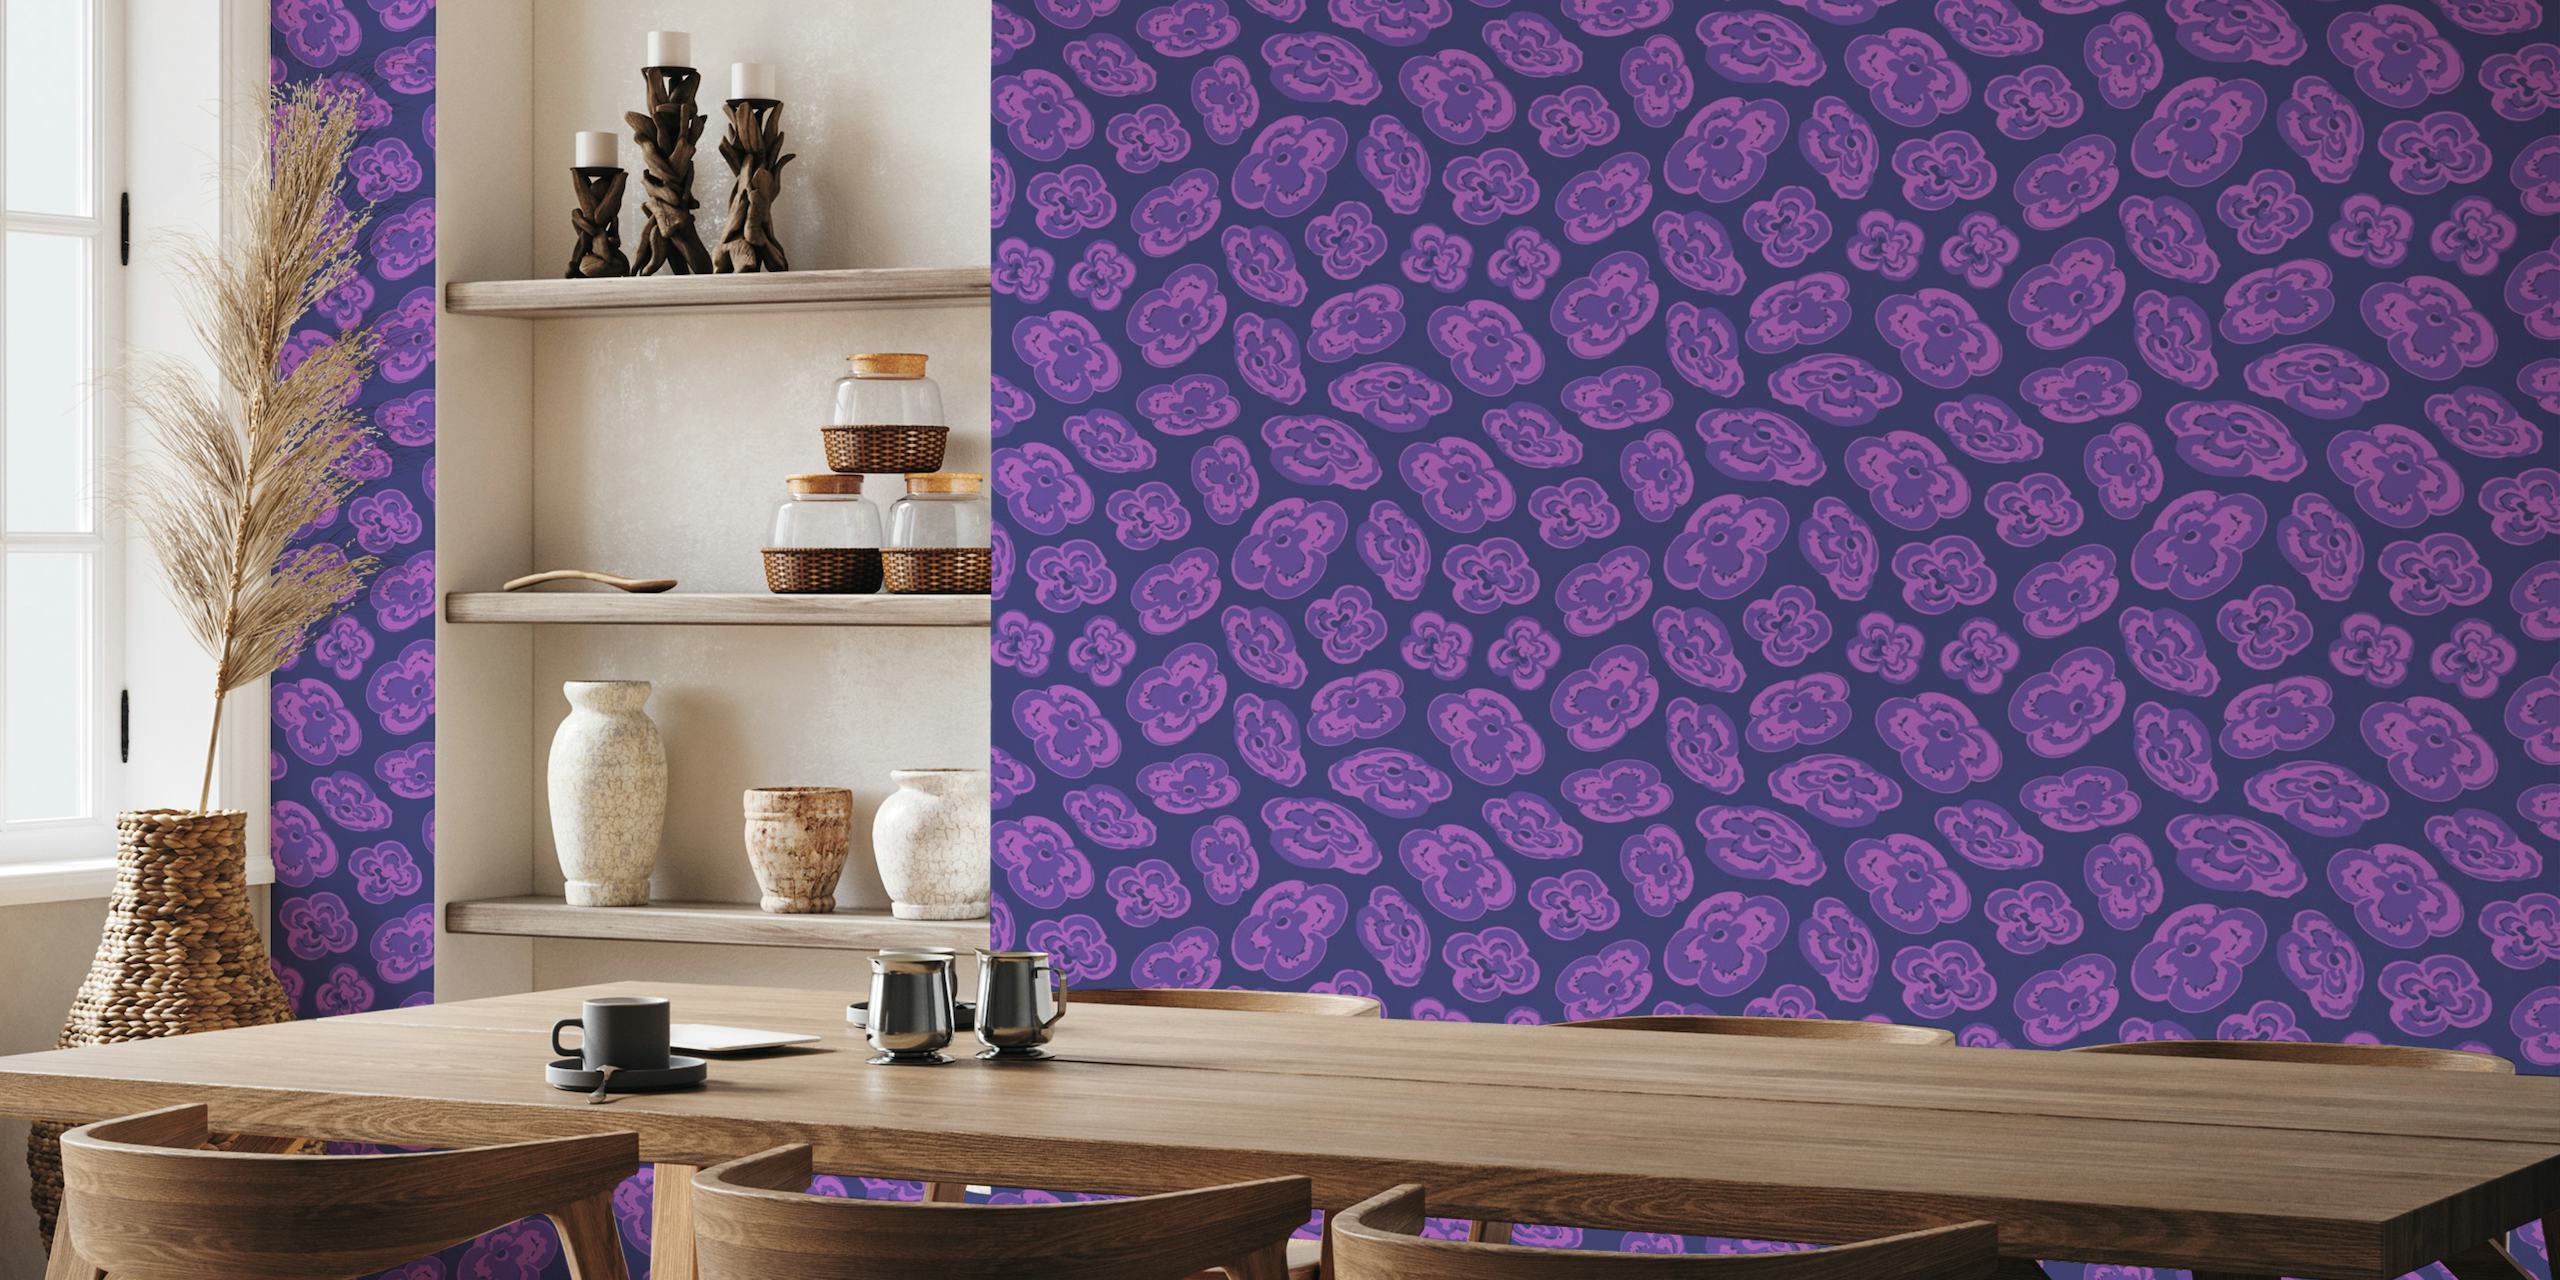 FLOATING LILIES Abstract Floral - Purple behang